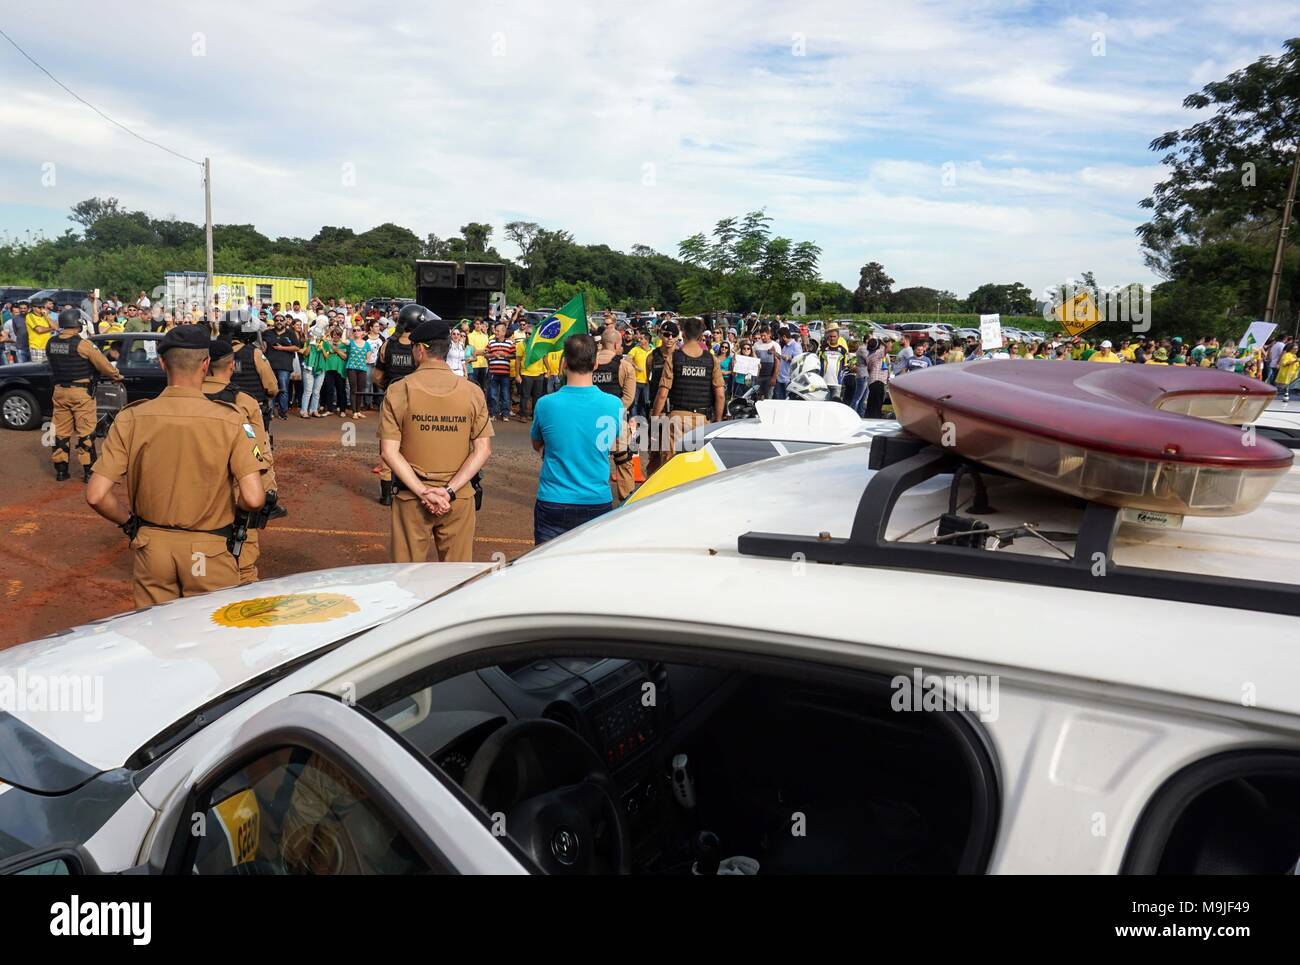 FOZ DO IGUAÇU, PR - 26.03.2018: CARAVANA LULA EM FOZ DO IGUAÇU PR - Former President Luiz Inácio da Silva arrived in Foz do Iguaçu amid threats and protests. Before the former president&#39;s icipatipation there was confrontation of anti-Lula demonstrators with the Military Police. Morale bombs and rubber bullets were used to disperse protesters. Lula participated in the International Seminar of the Triple Border at the Foz do Iguaçu Electricity Trade Union (Sinefi). The theme in question is education and integration between Latin American countries and has a special meaning for the former pre Stock Photo